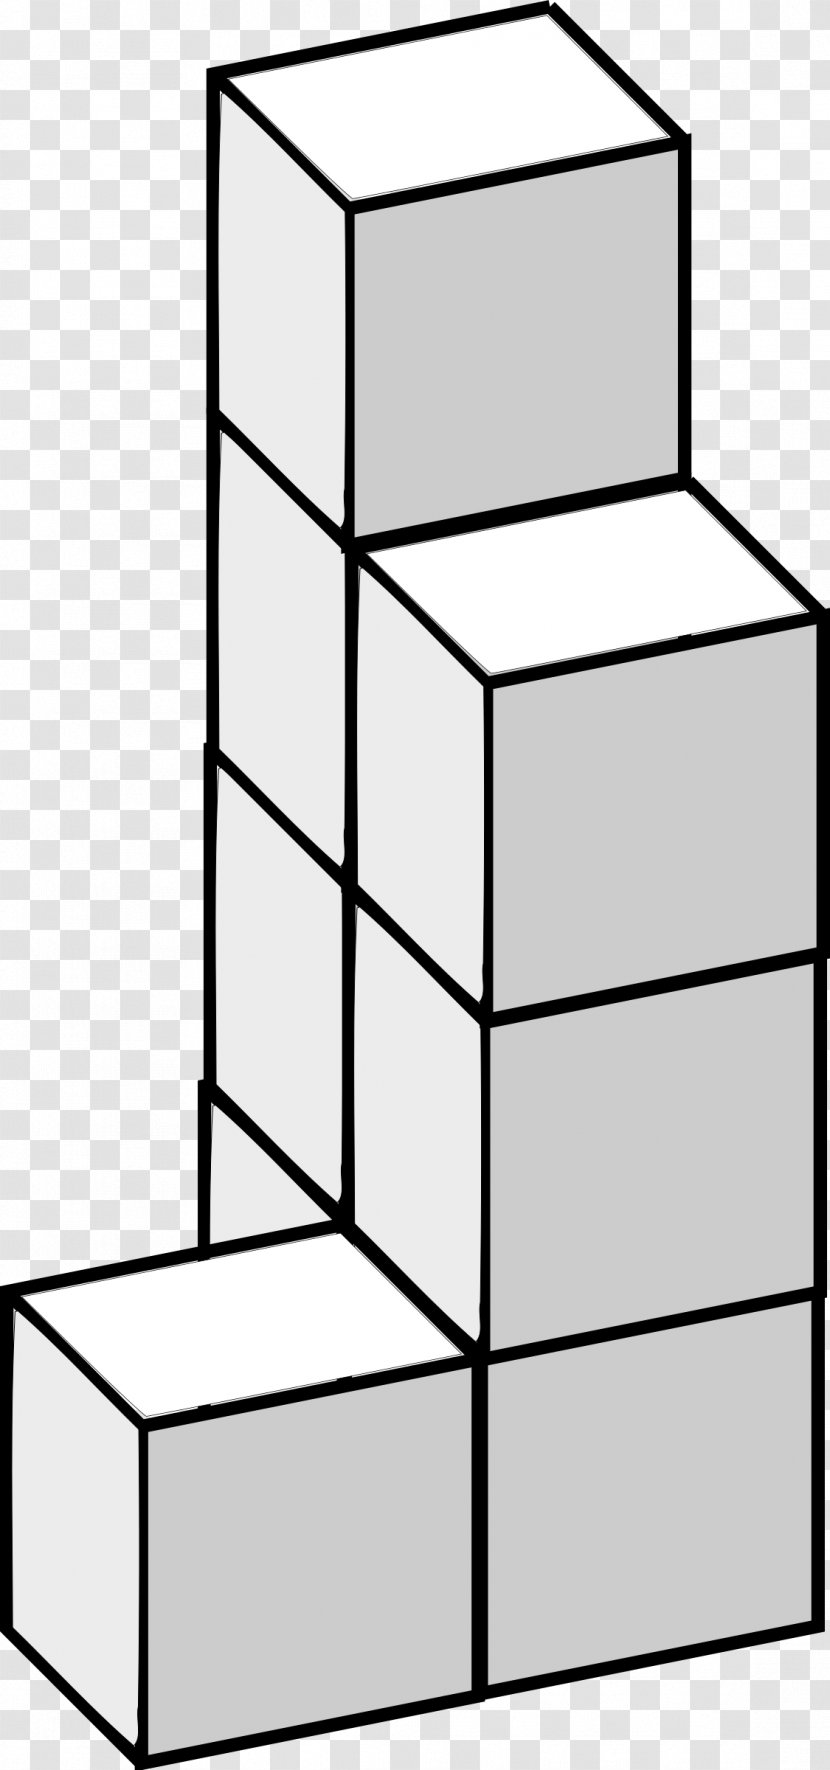 Soma Cube Rubik's Three-dimensional Space - Computer Software - Cubes Clipart Transparent PNG